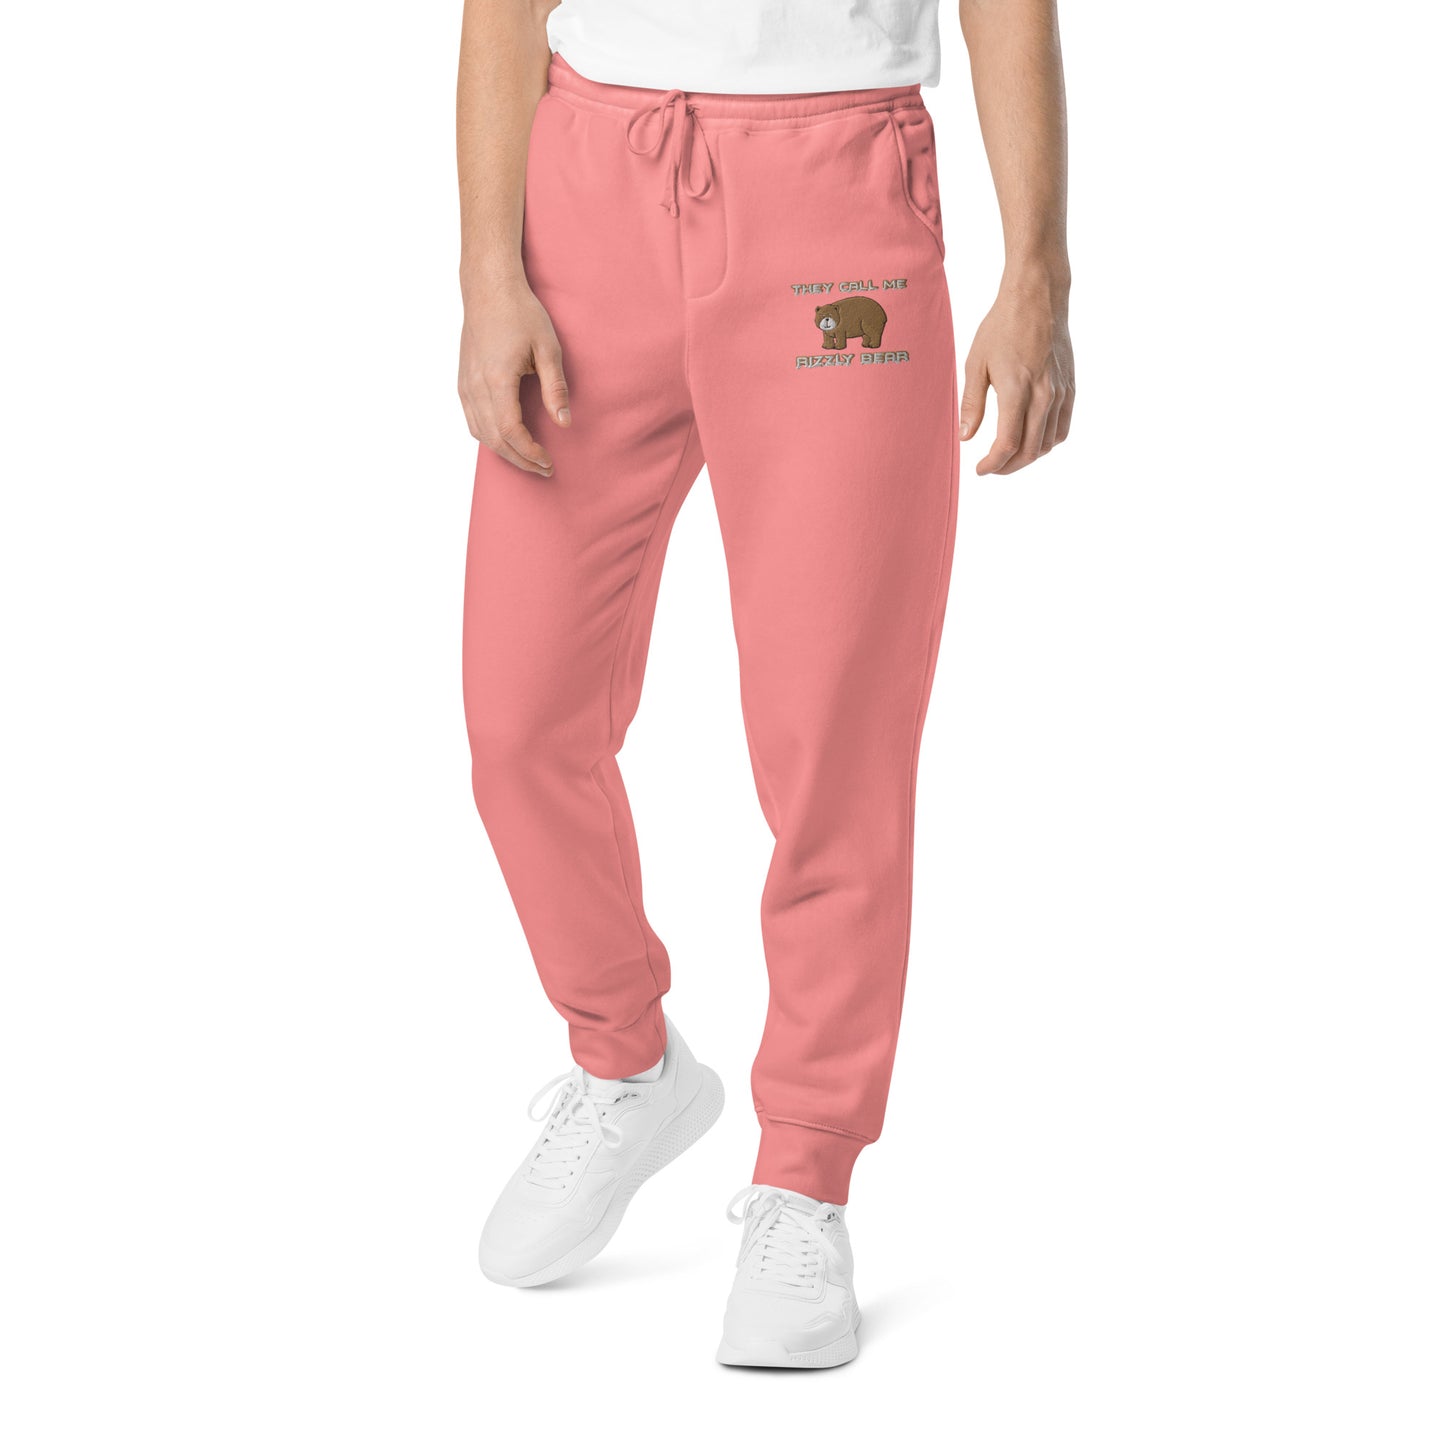 Rizzly Bear pigment-dyed sweatpants